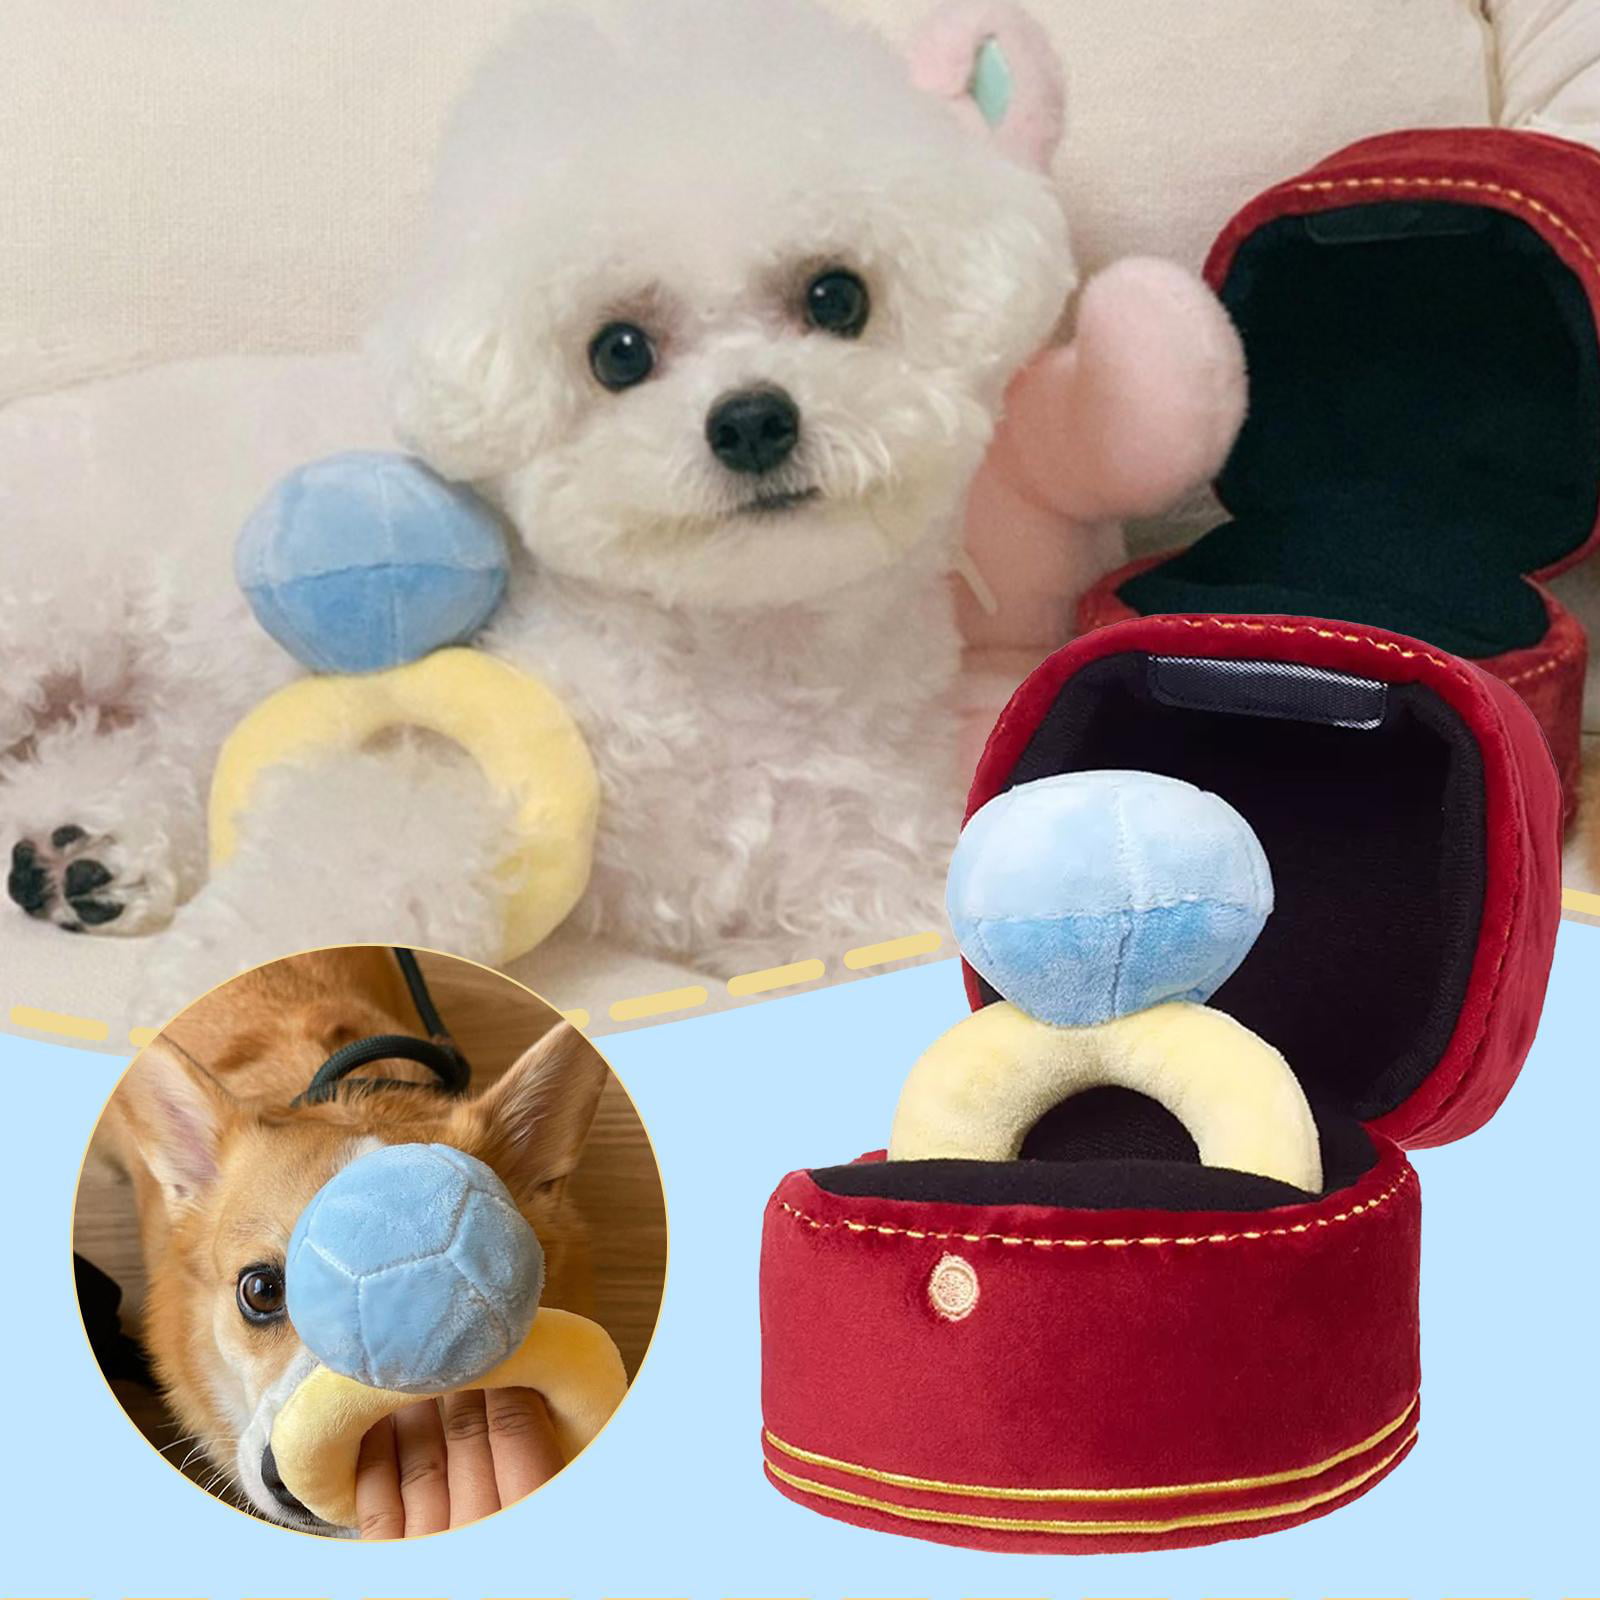 Dog Squeaky Chew Toy Soft PP Cotton Washable Teething Puppy Puzzle